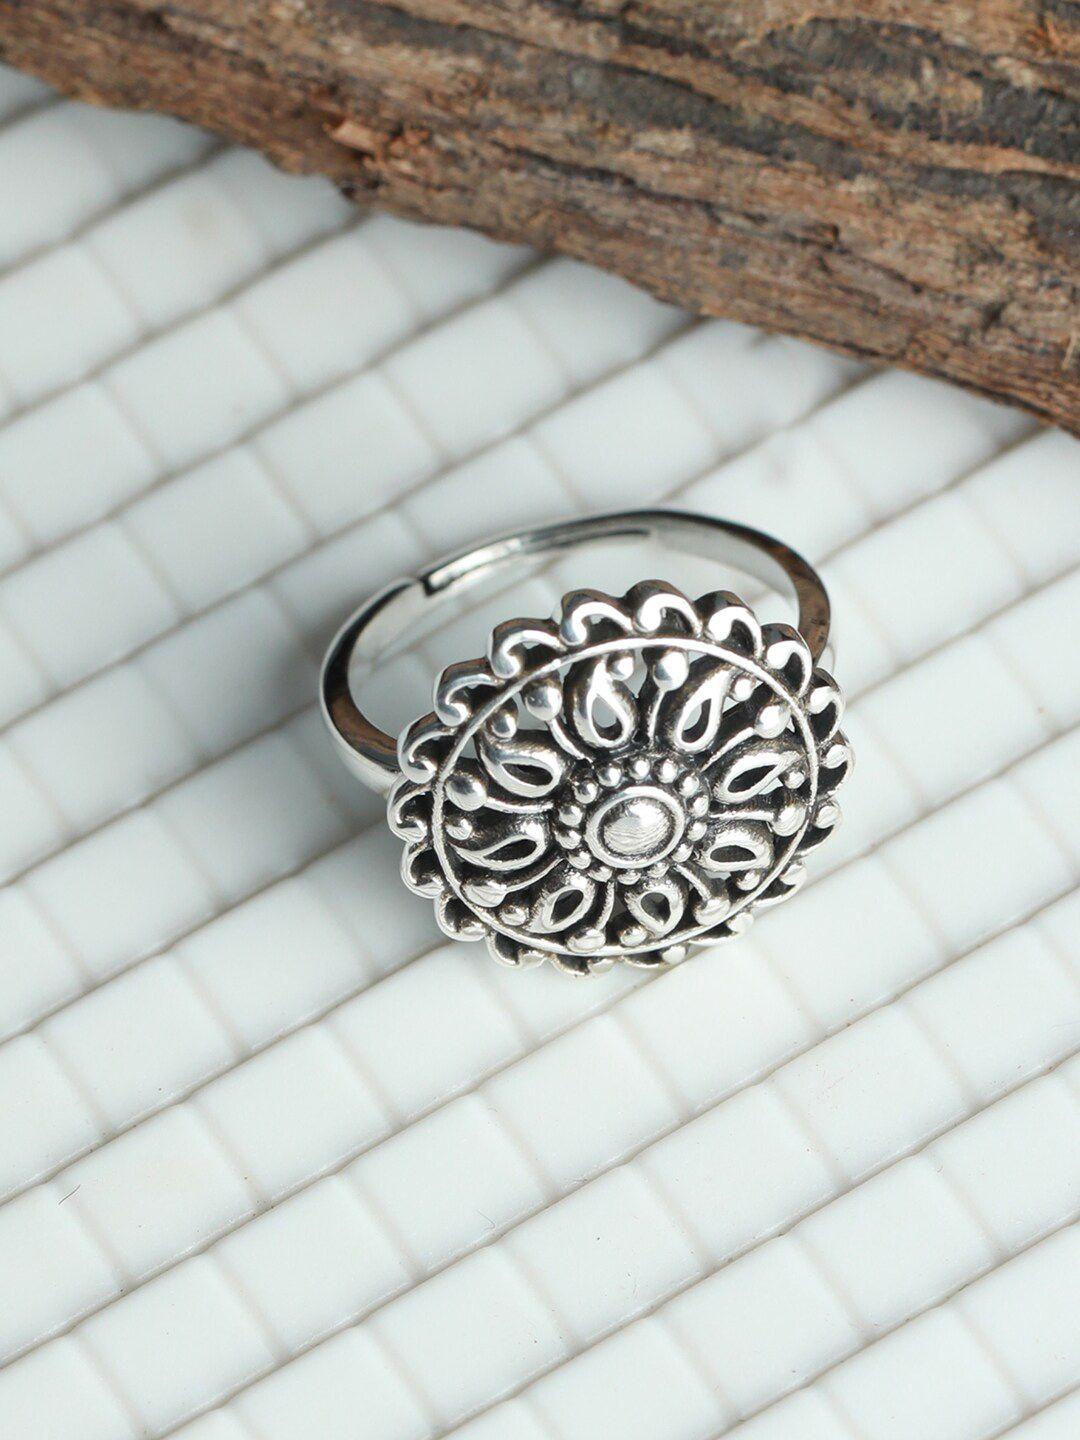 sheer by priyaasi oxidised silver-plated 92.5 sterling silver ad studded finger ring